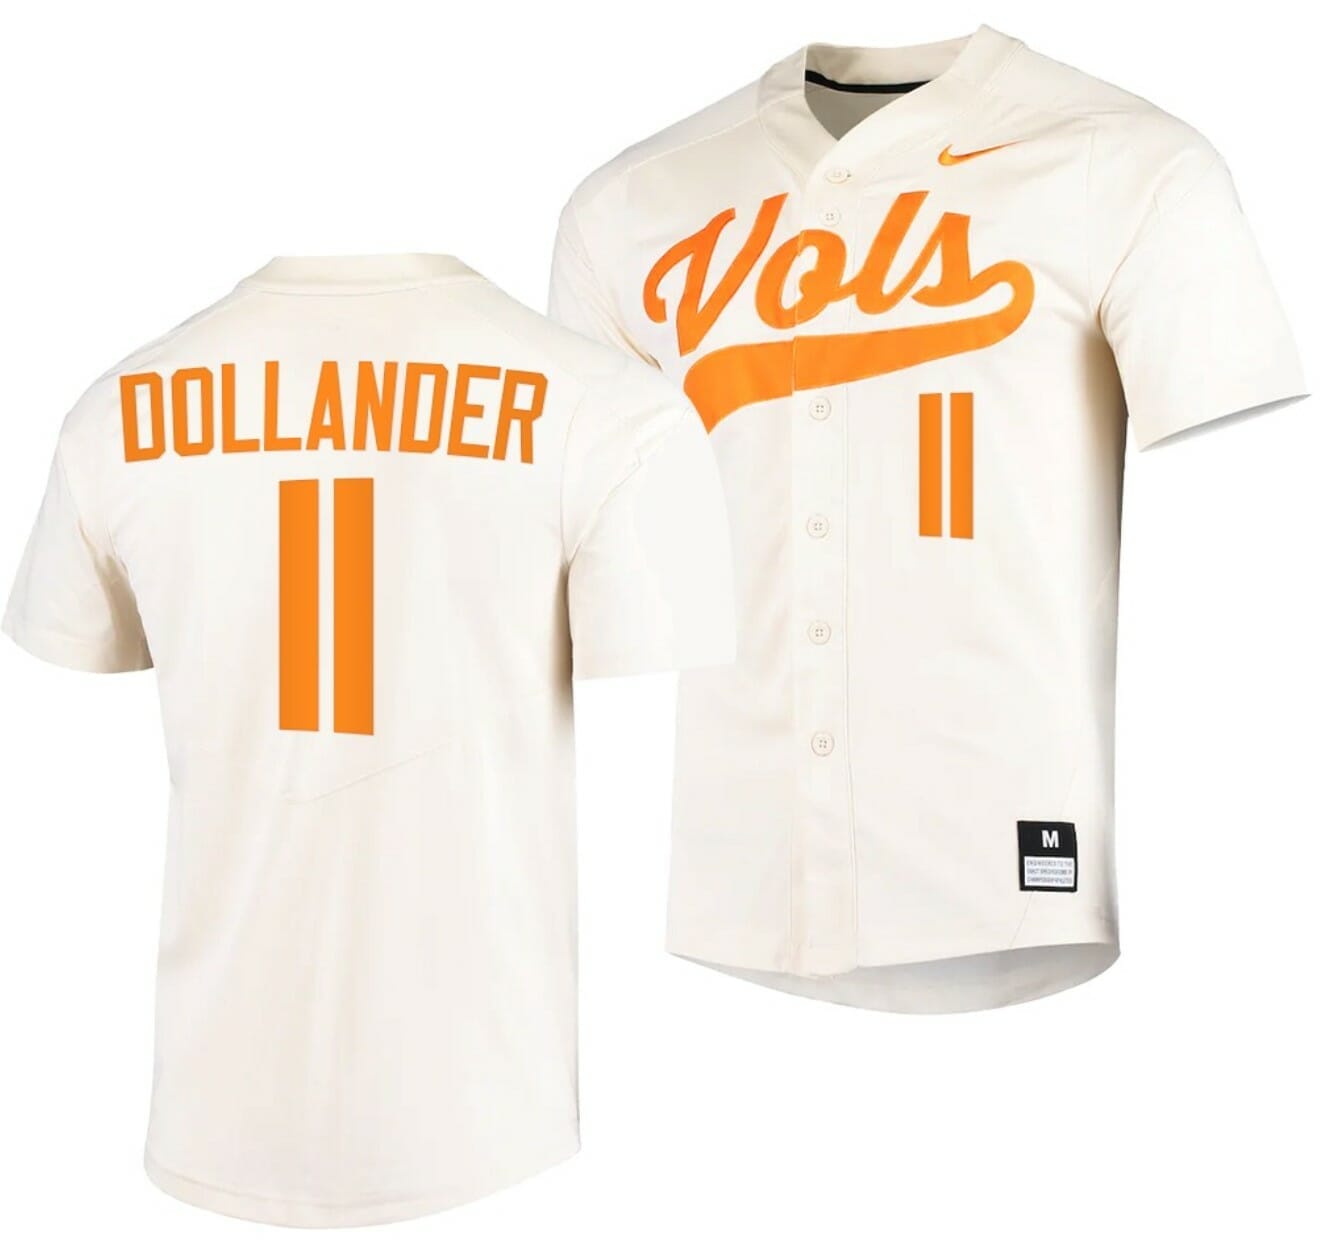 Available] New Chase Dollander Jersey Tennessee White #11